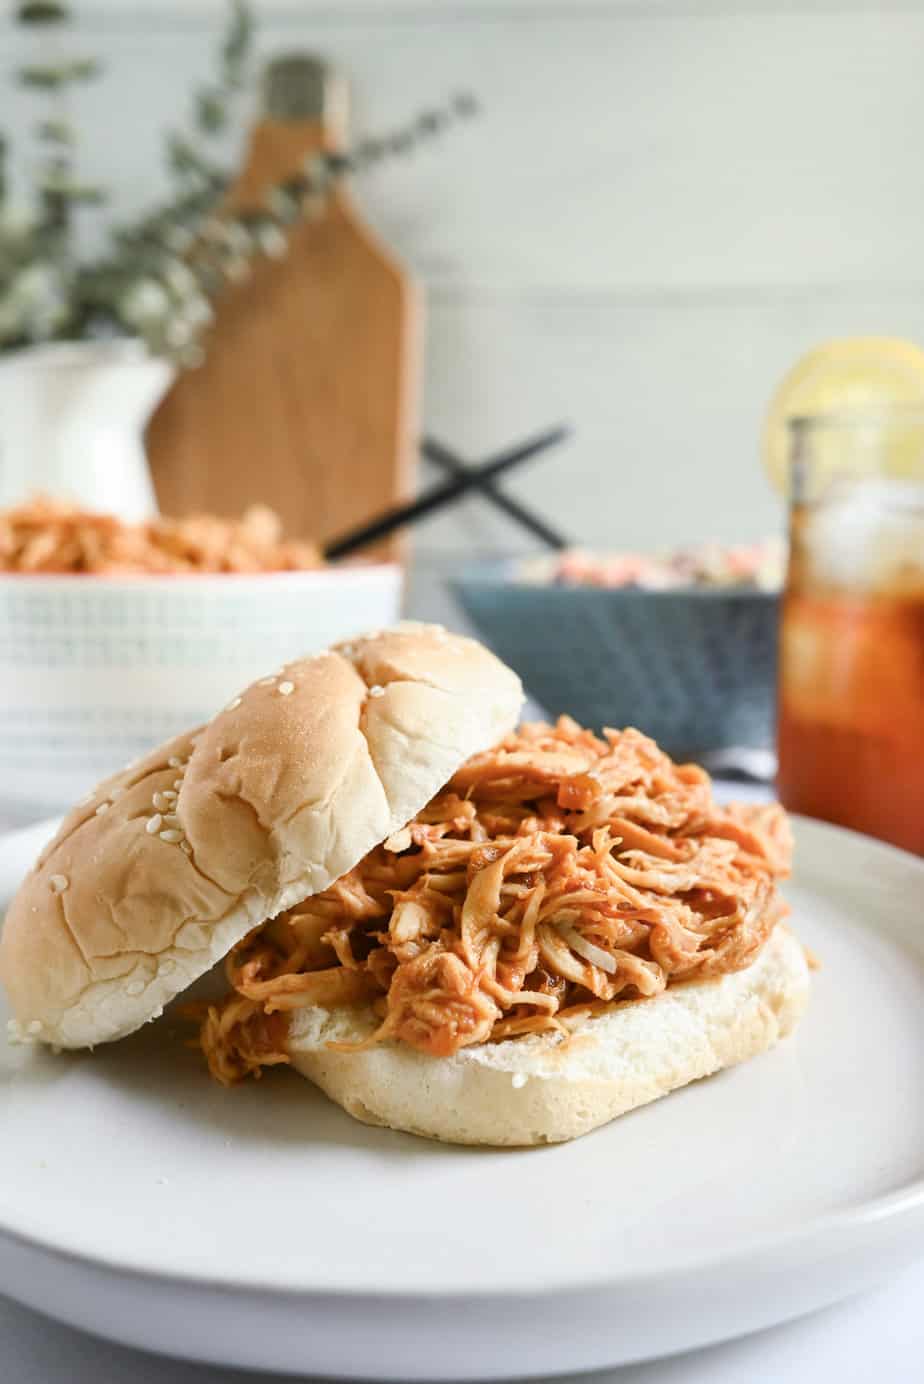 Sesame bun topped with crockpot pulled chicken, set on a white plate.